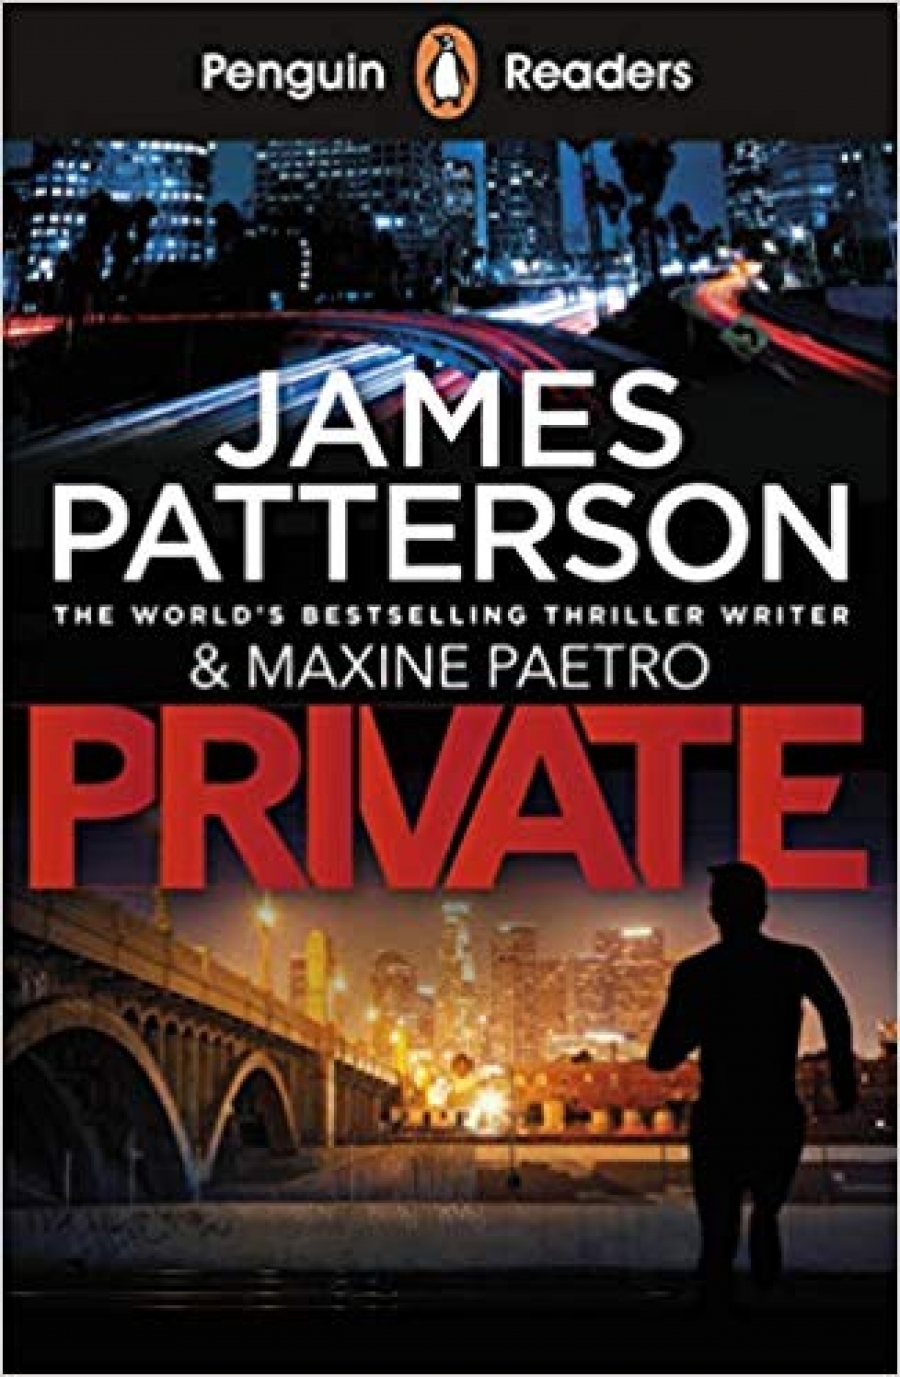 Patterson, Maxine, James and Paetro Penguin Reader Level 2: Private 